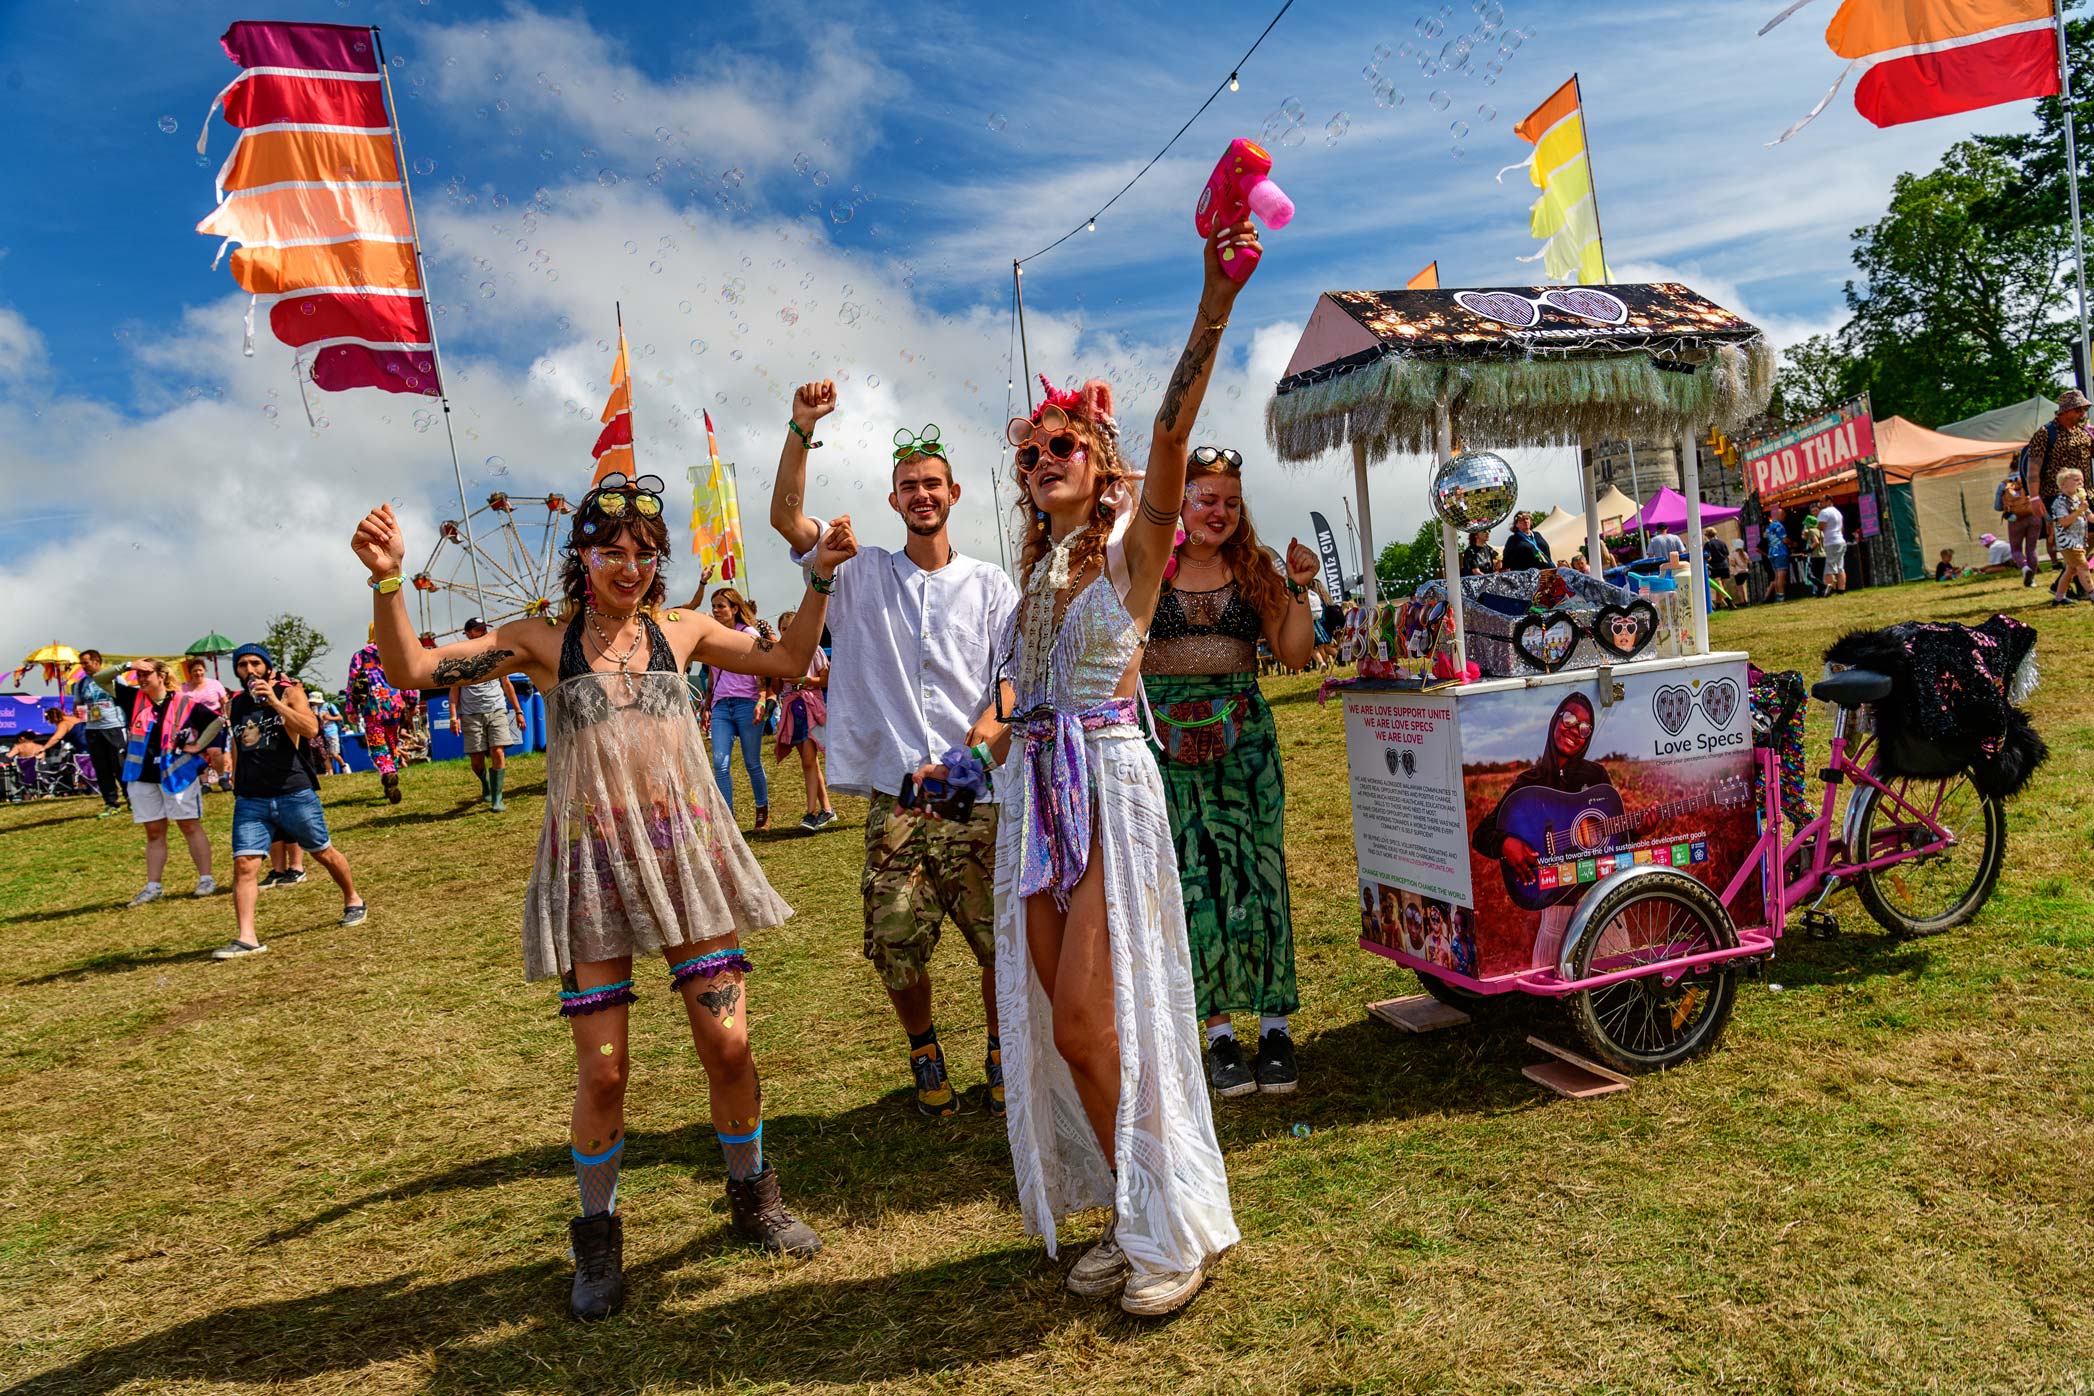 oin the vibrant celebration at a music festival captured by Wright Content during the daytime. In this lively shot, festival-goers immerse themselves in the festive atmosphere, joyfully blowing bubbles high into the sky. Adorned in colorful festival attire, they radiate excitement and happiness under the sun. Wright Content's expert photography encapsulates the exuberance of daytime festival revelry